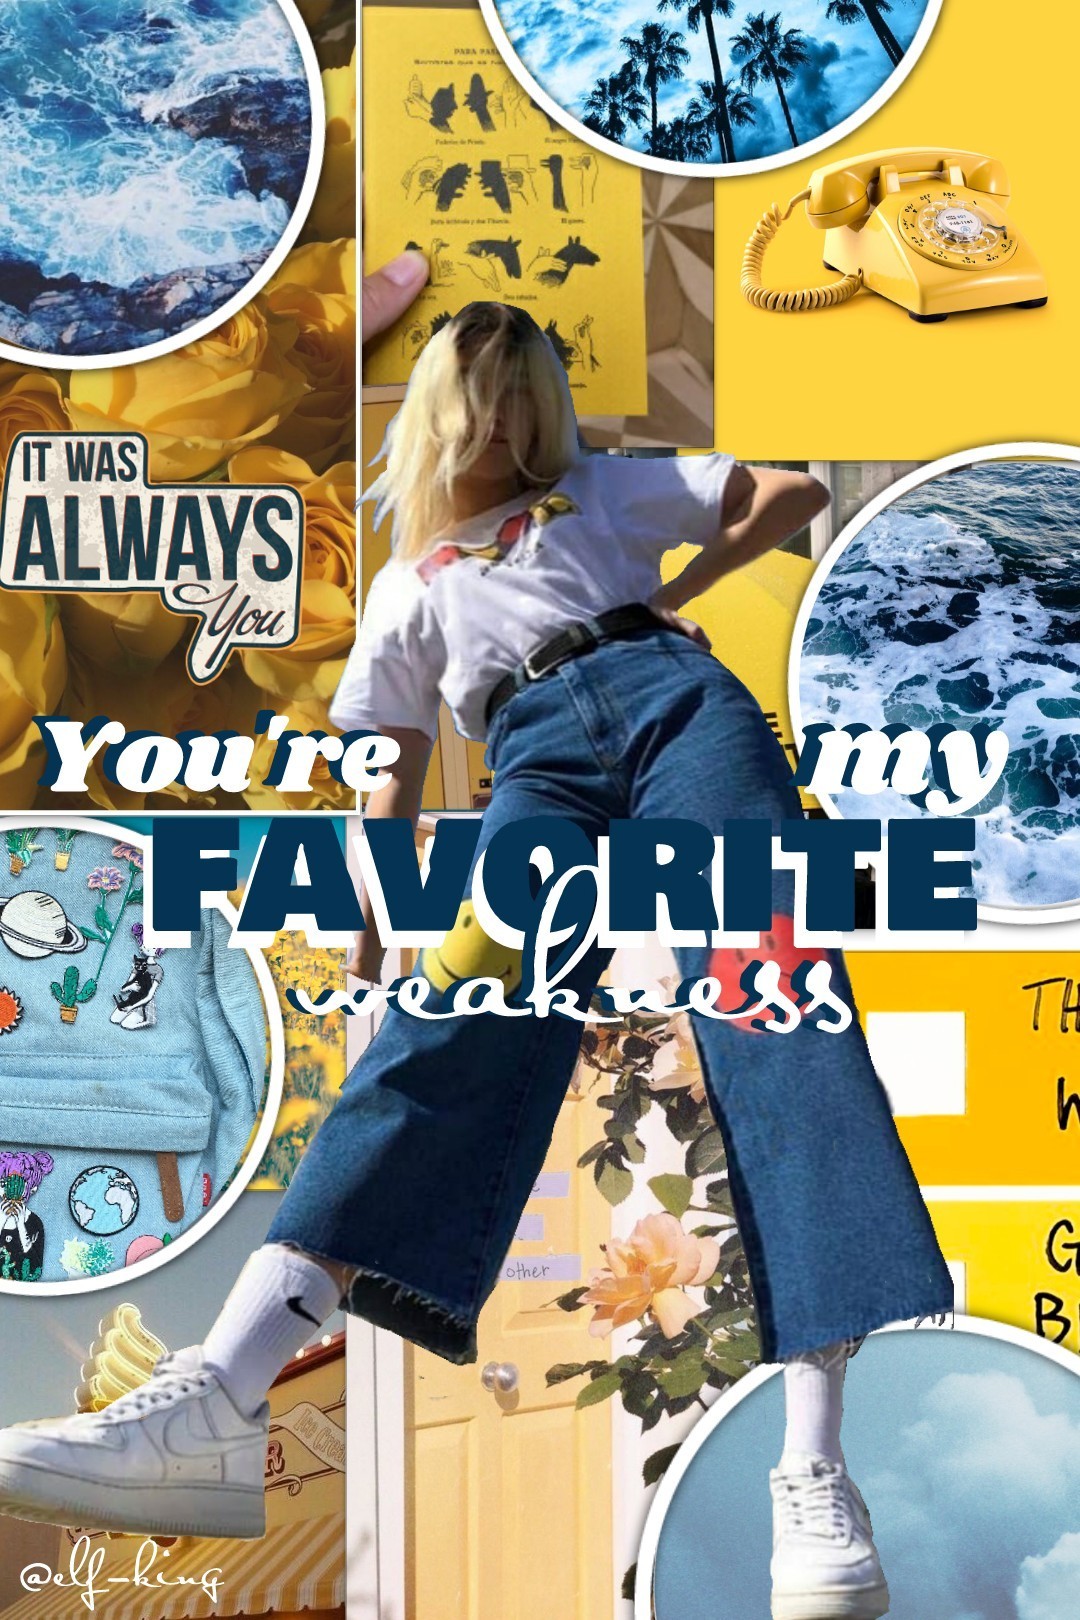 Another collage woahhhh~
I know, I know, I ned to finish my 100 post because I appreciate you guys so much! but inspo for that is.... pretty much non-existent. So I'm sorry  and working on it